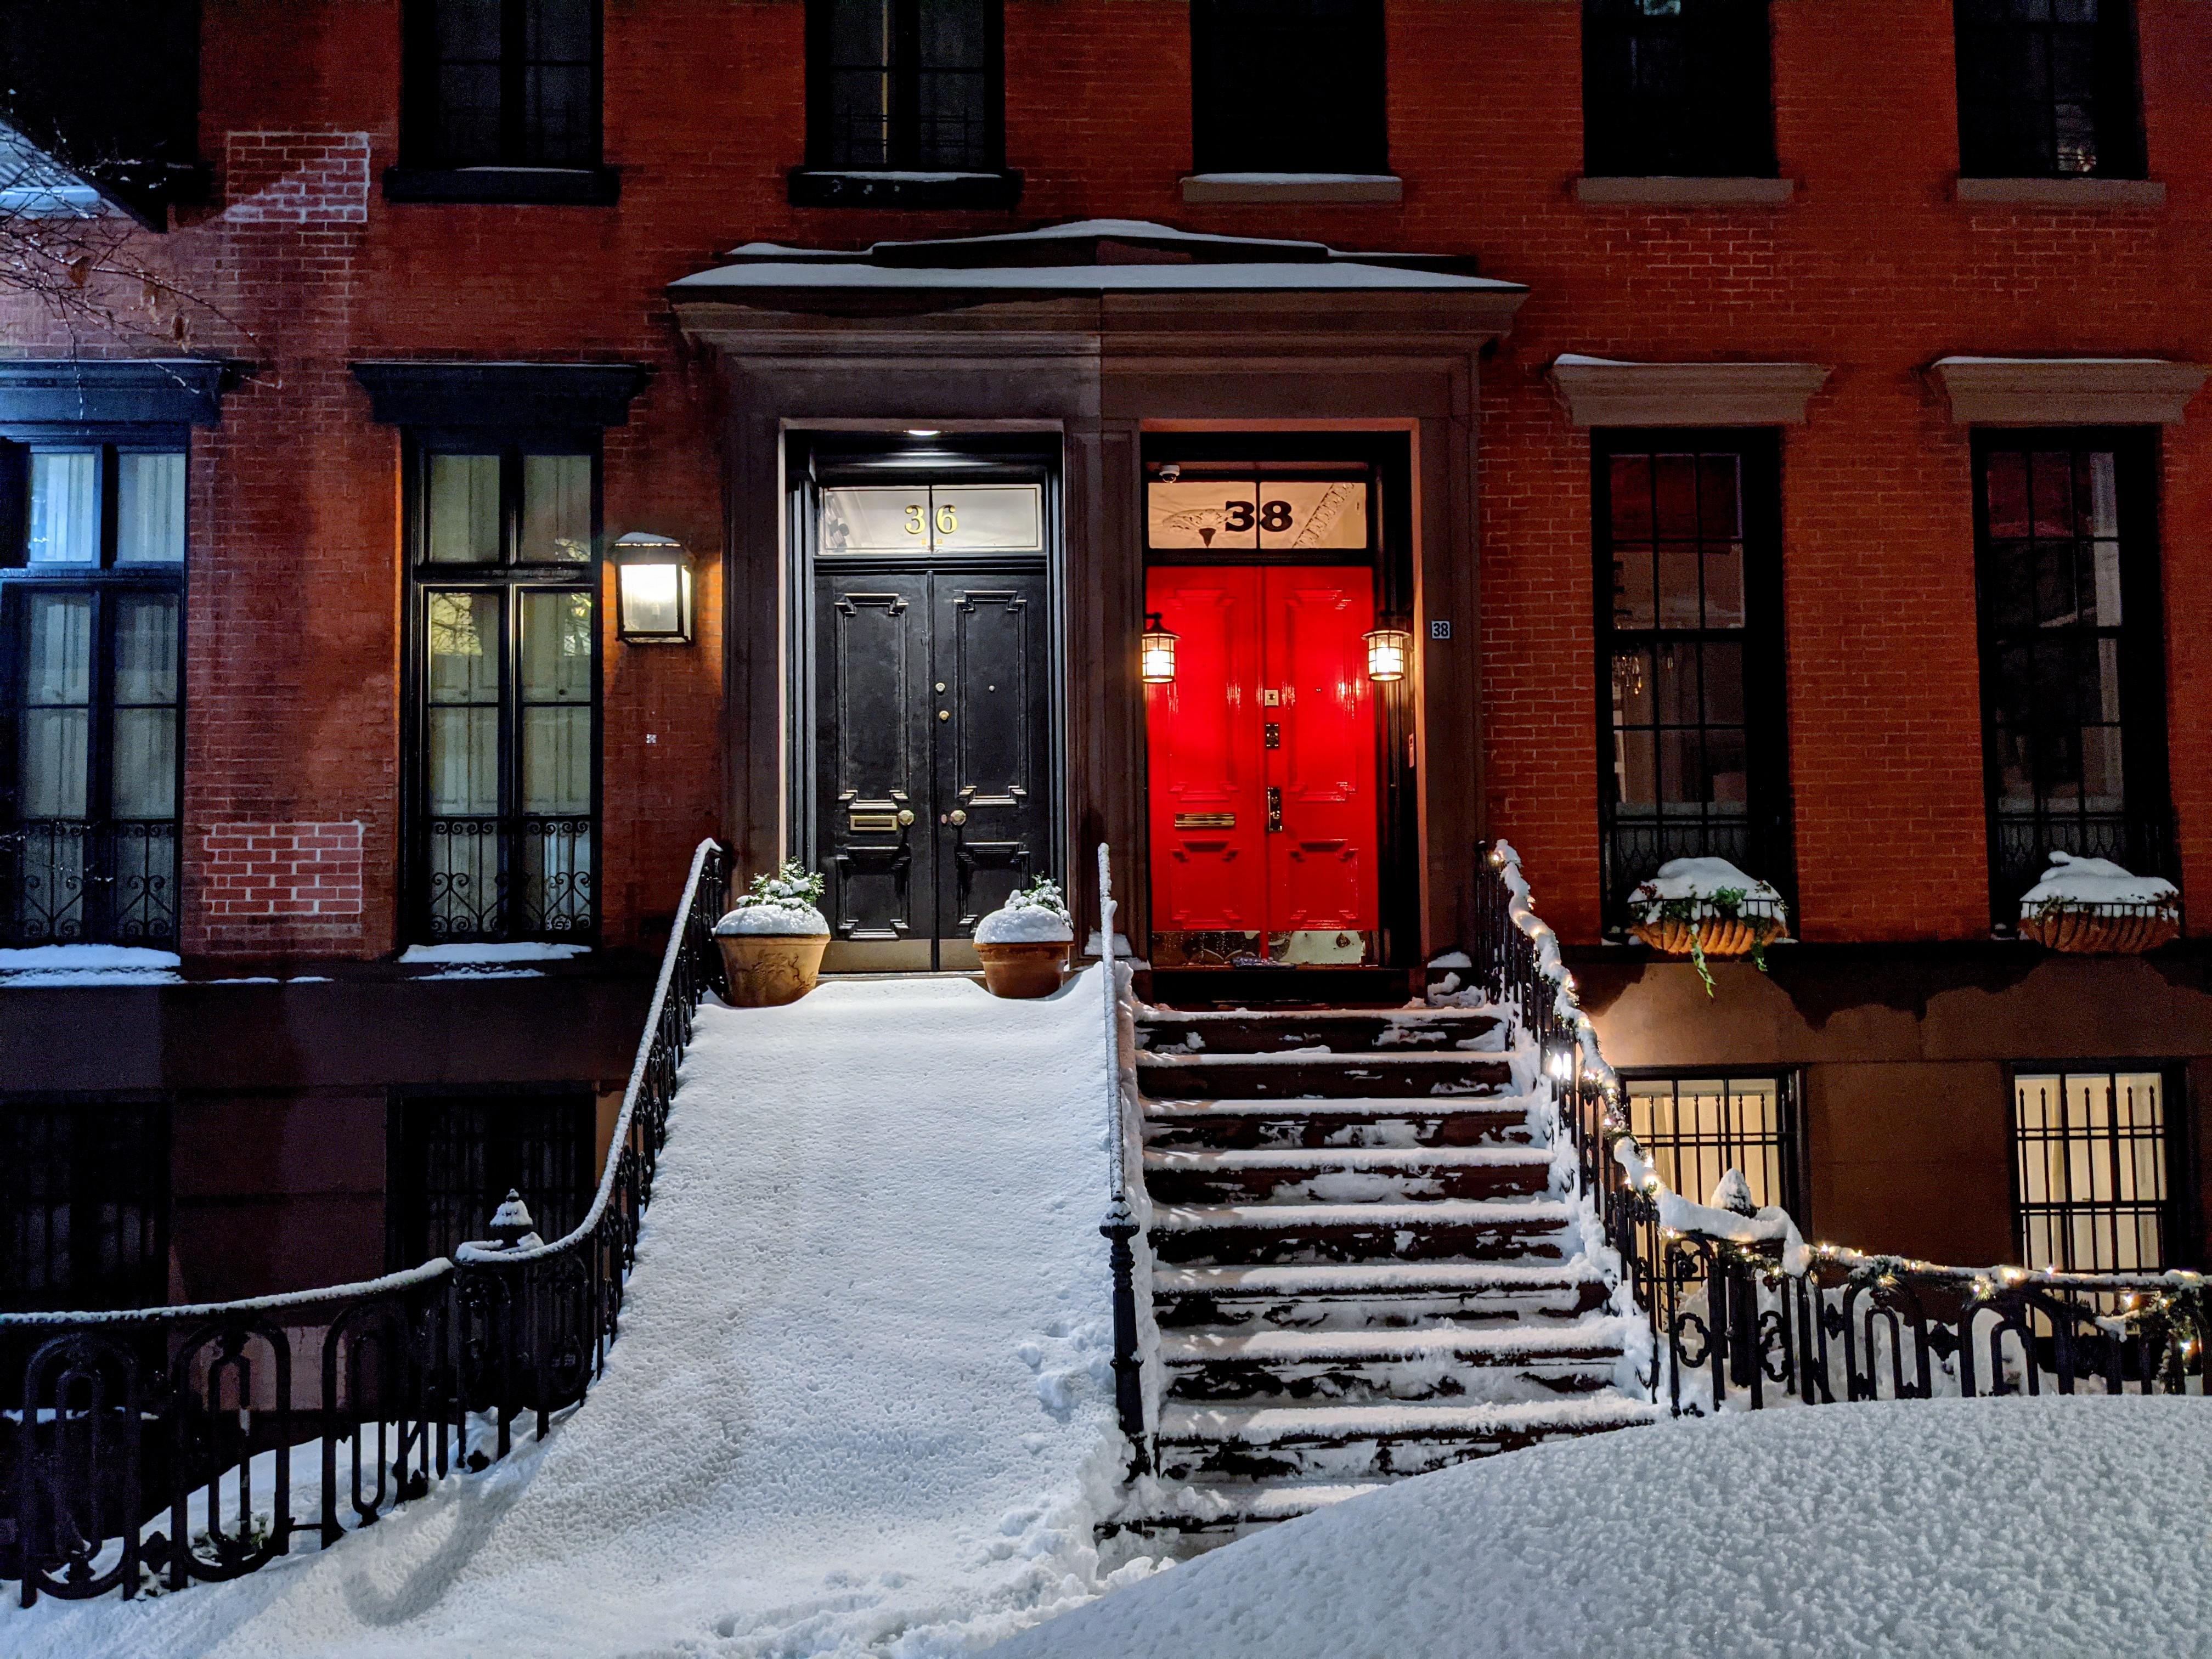 funny pics - snow in front of a building with a black door and a red door - 38 Hich